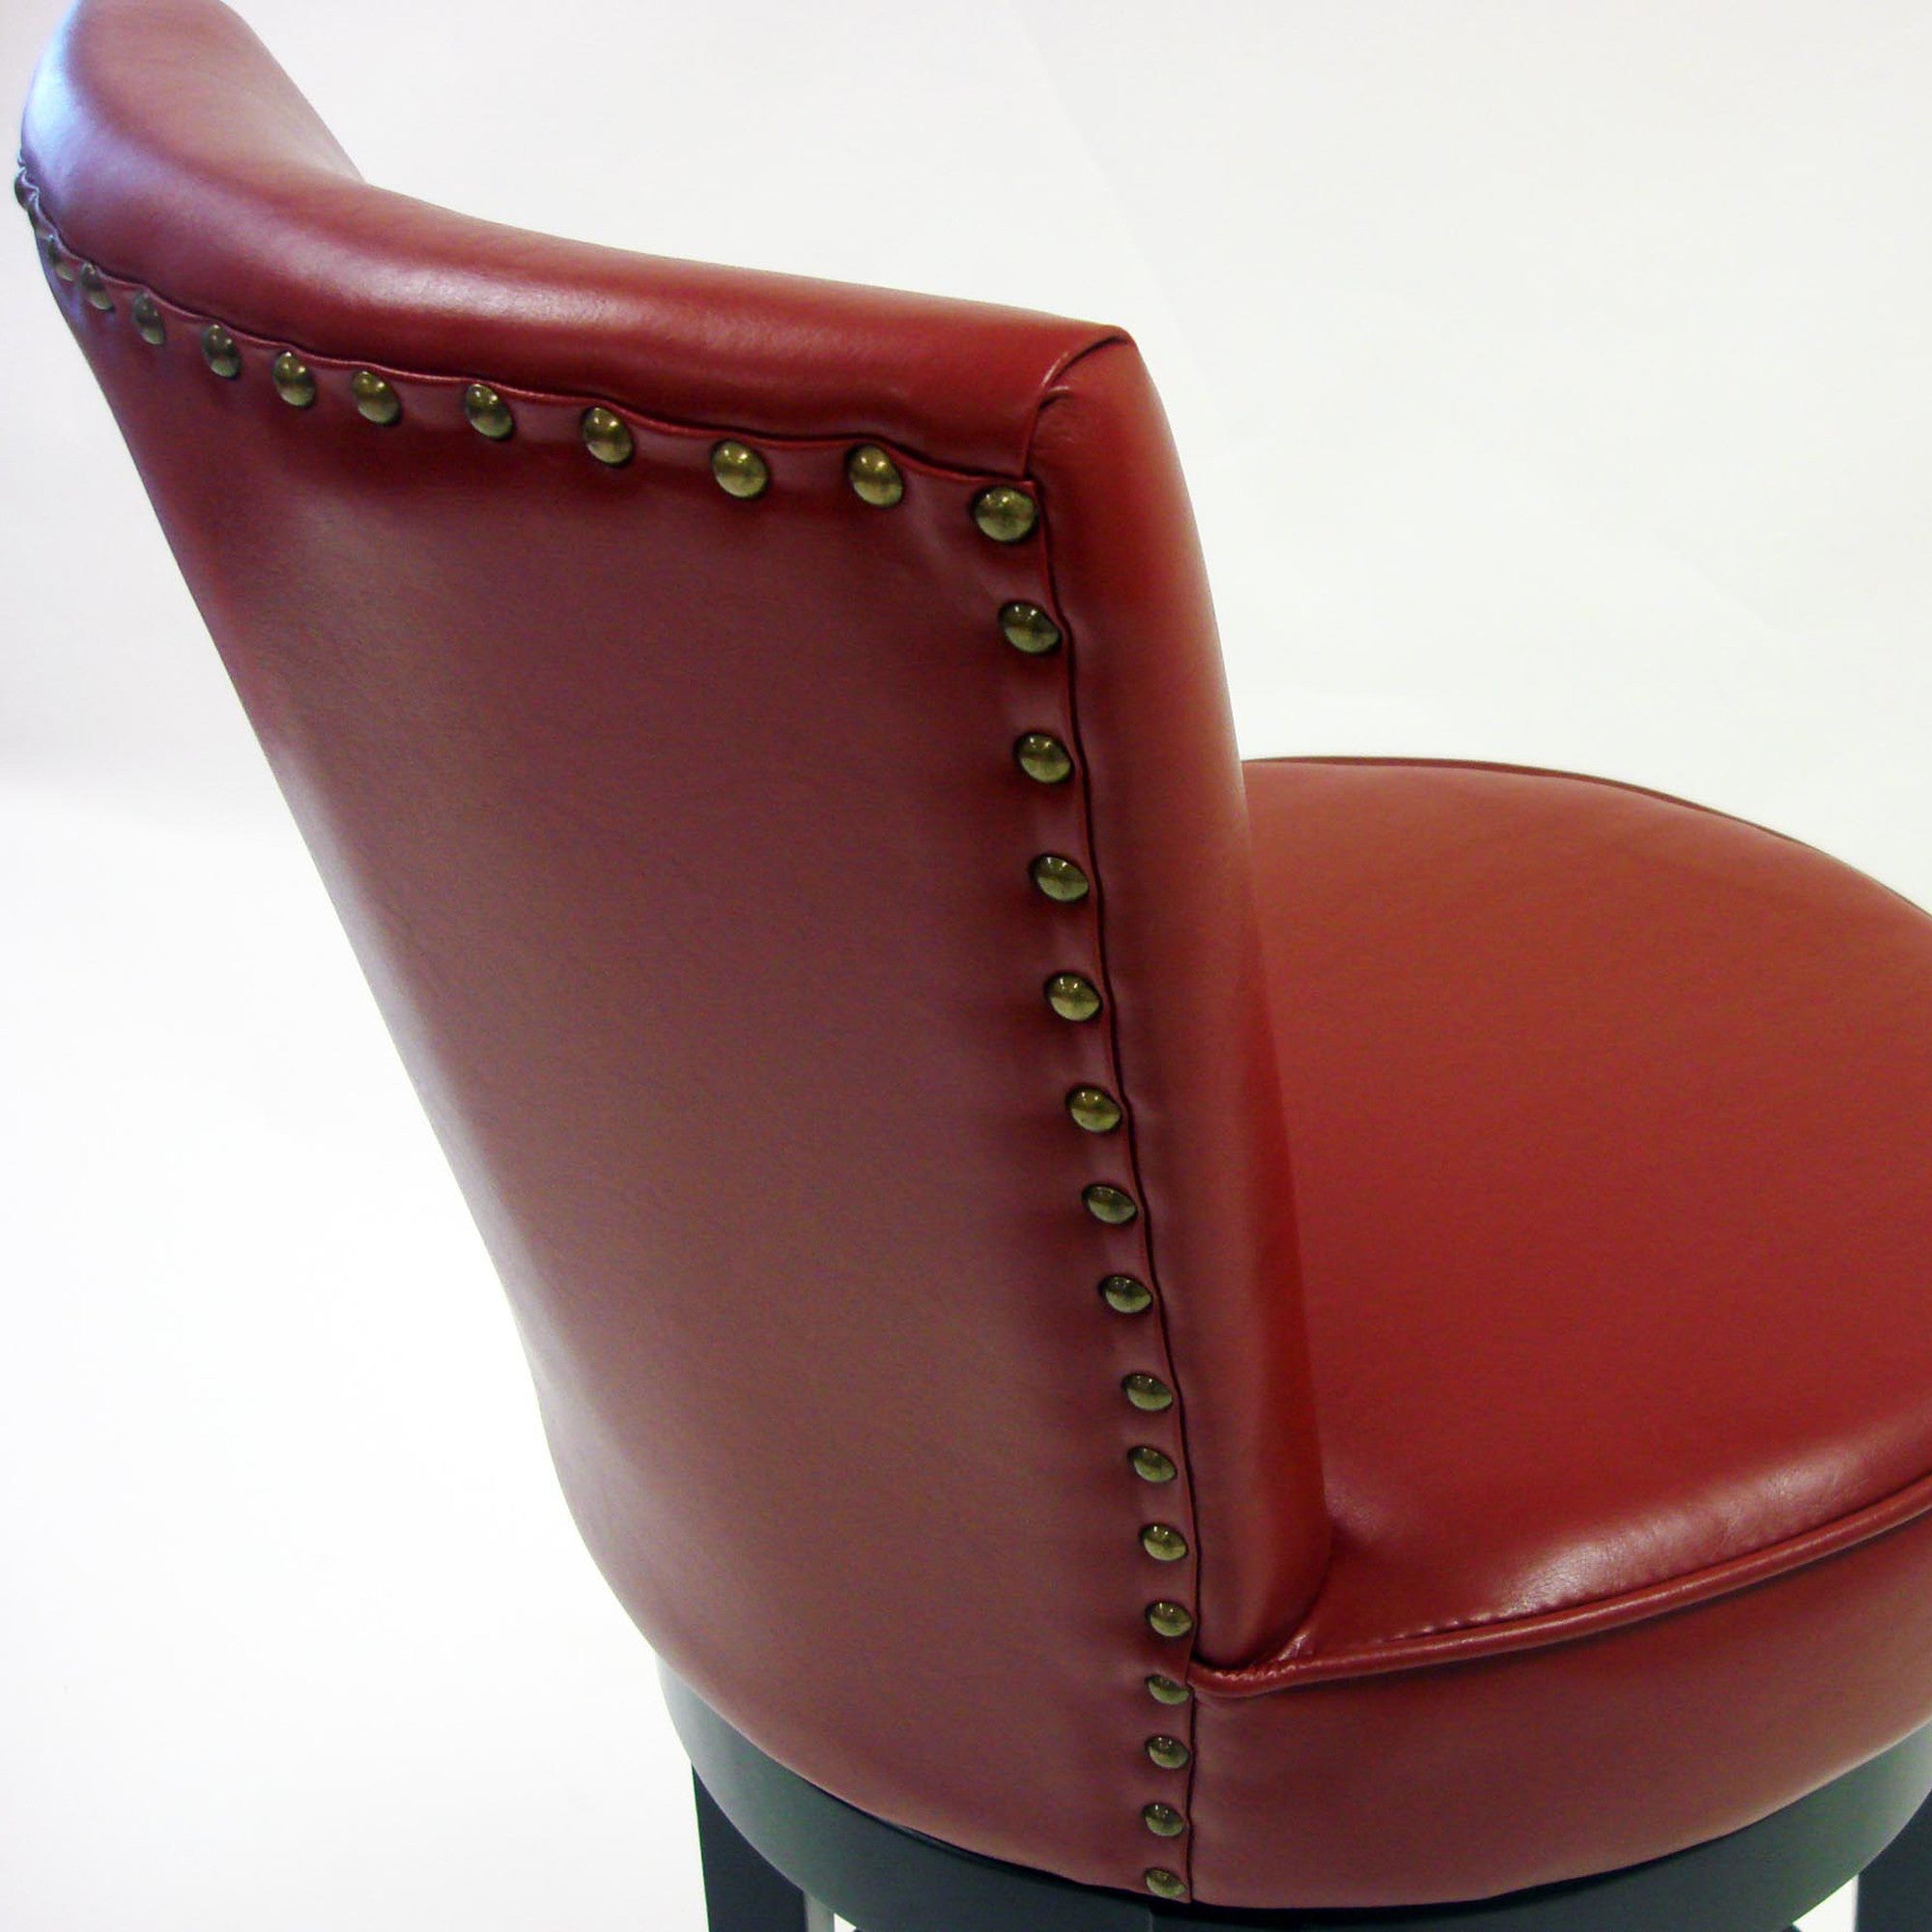 30" Red And Black Solid Wood Swivel Bar Height Bar Chair